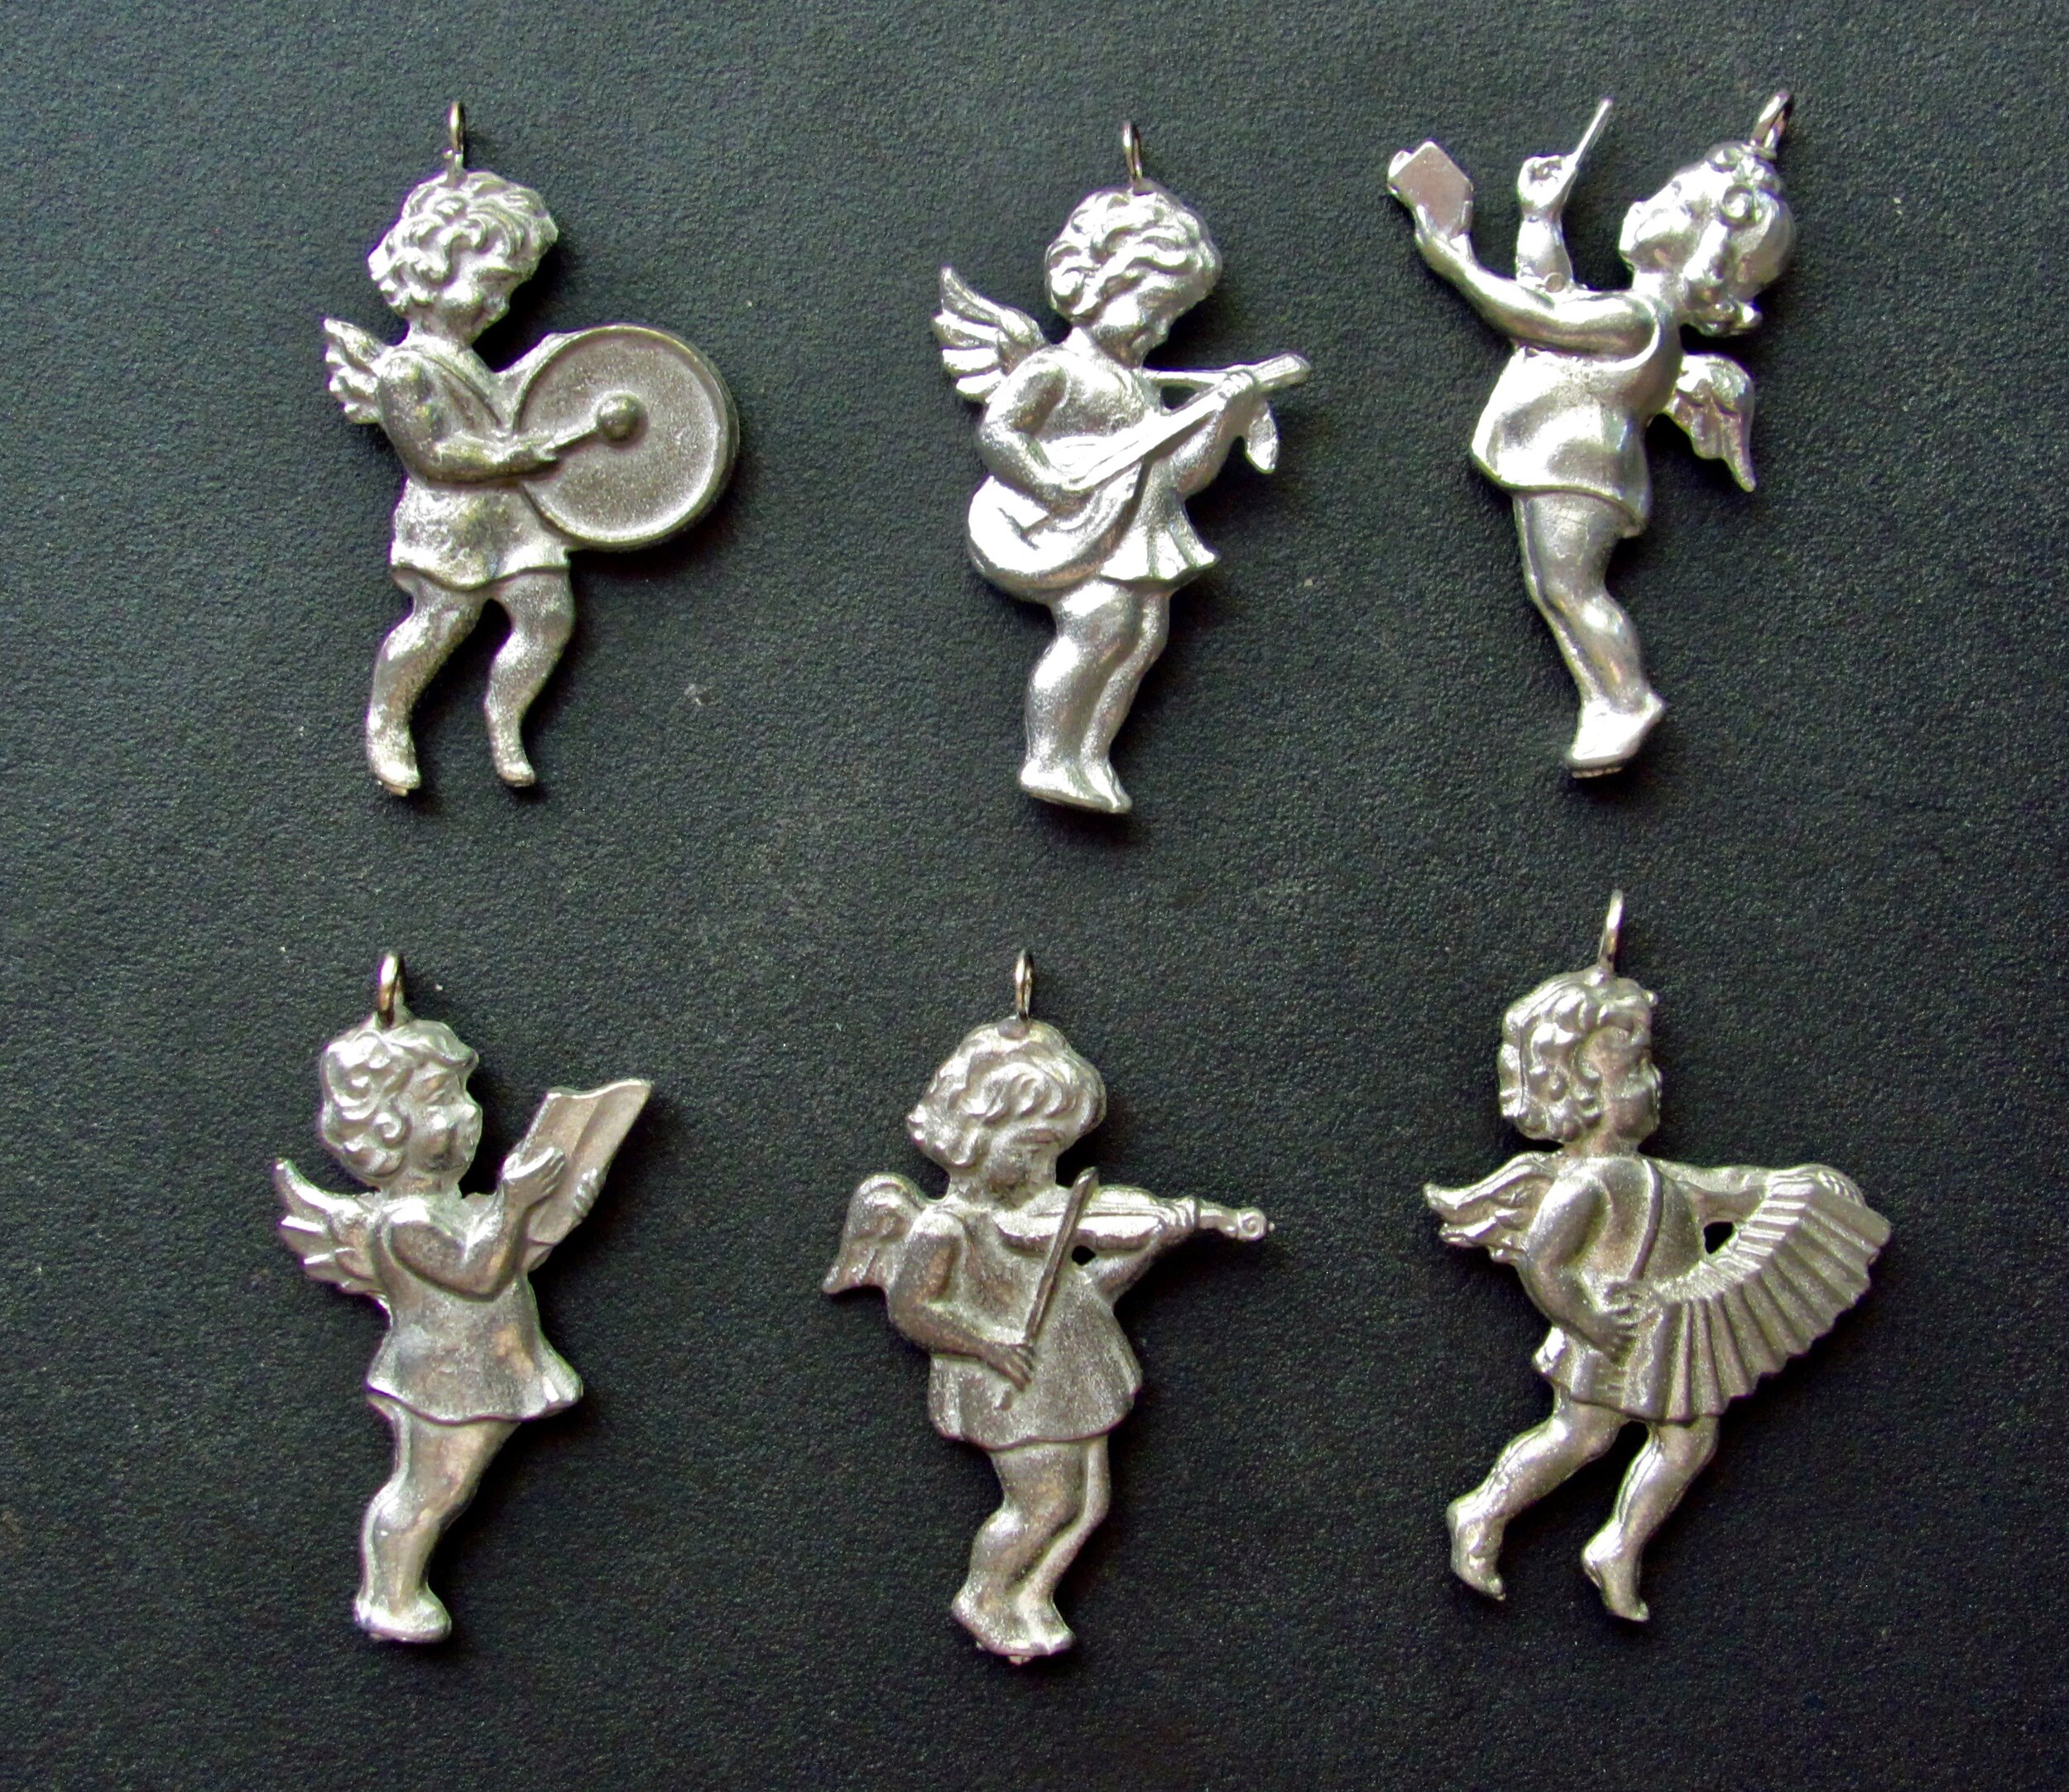  11- Angel with rum  12- Angel with lute  13- Angel conducting  14- Angel singing  15- Angel with violin  16- Angel with accordion   